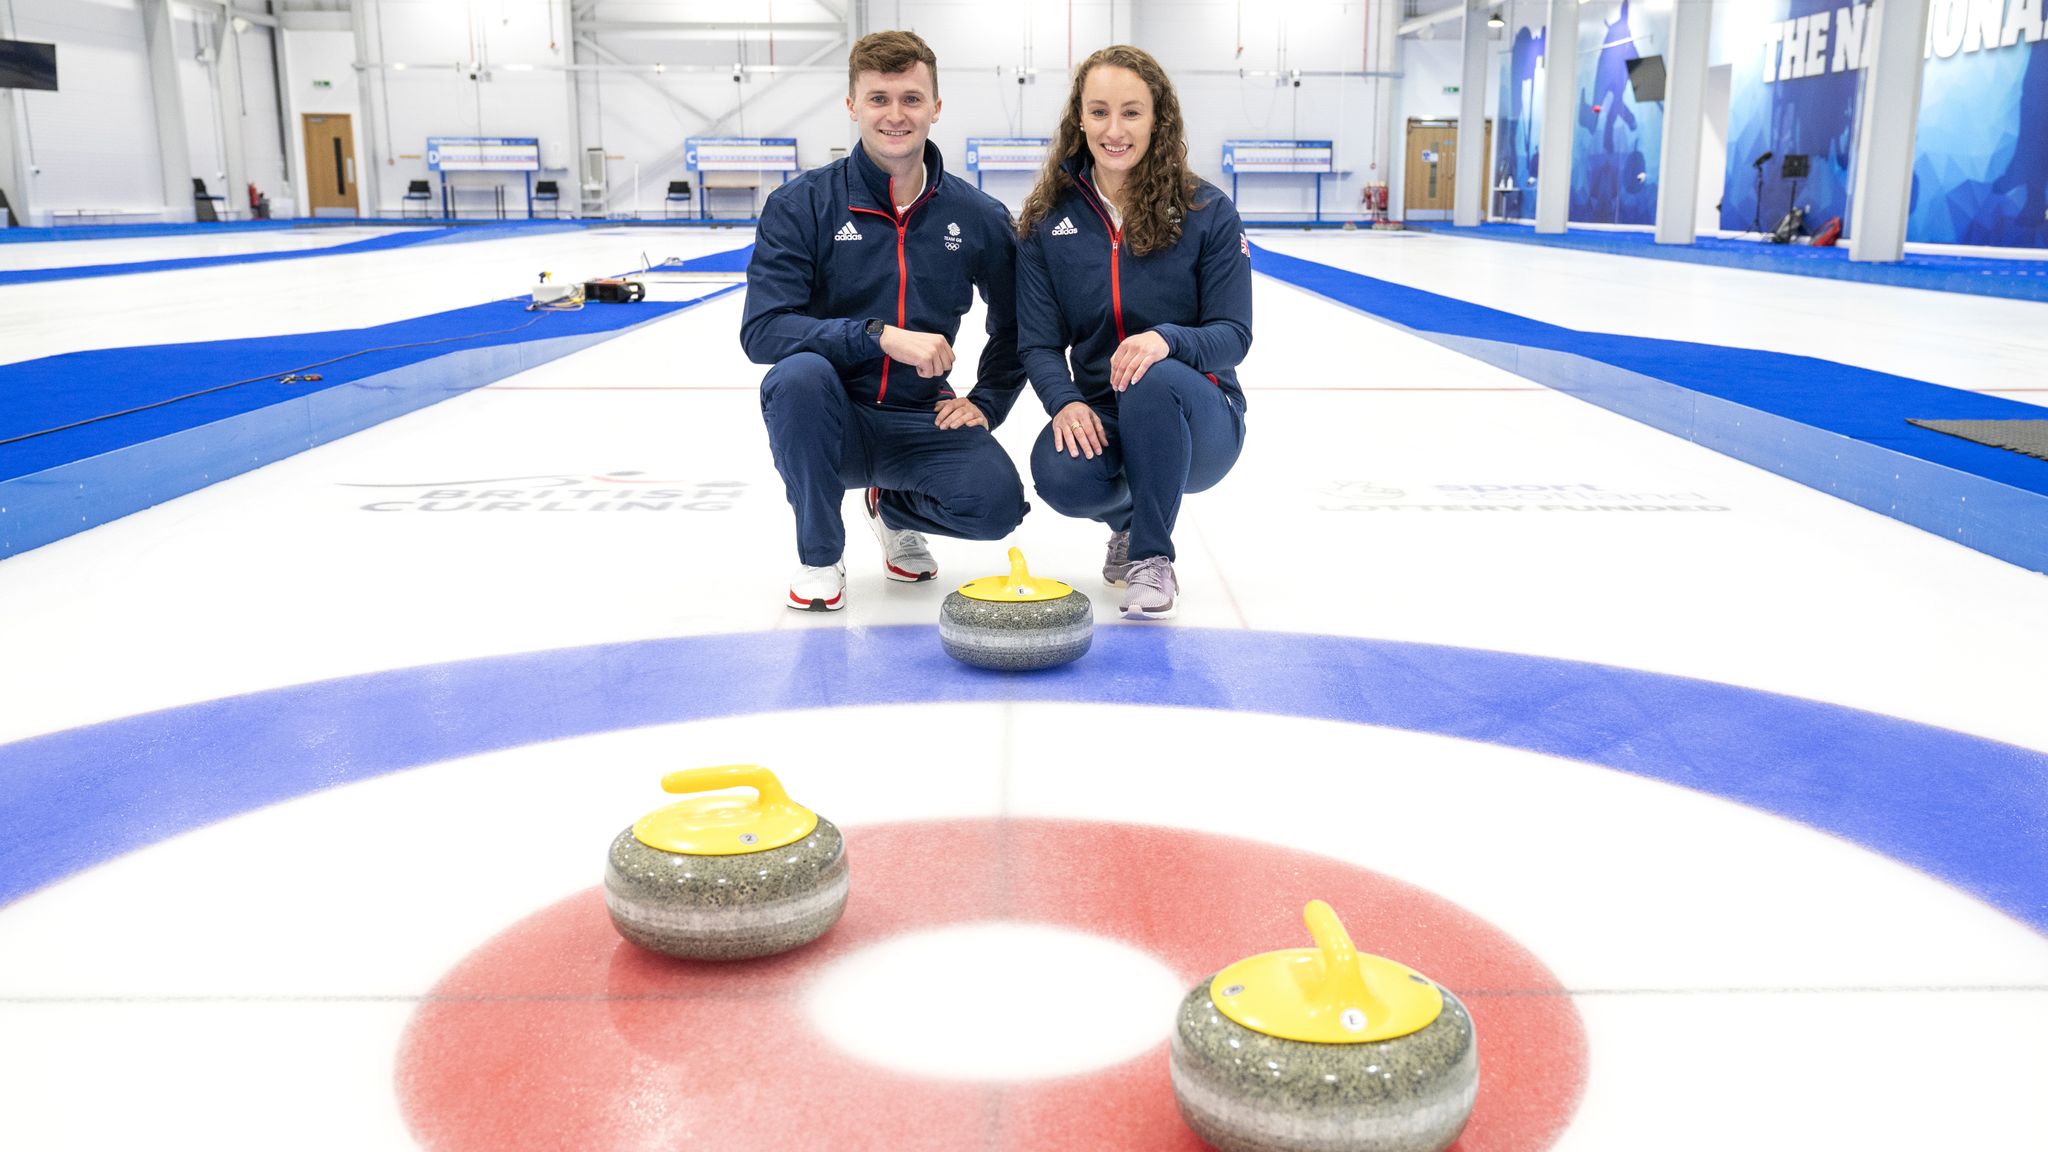 Bruce Mouat GB curling skip says pure support of team-mates helped take away stress of struggle with sexuality News Sky Sports